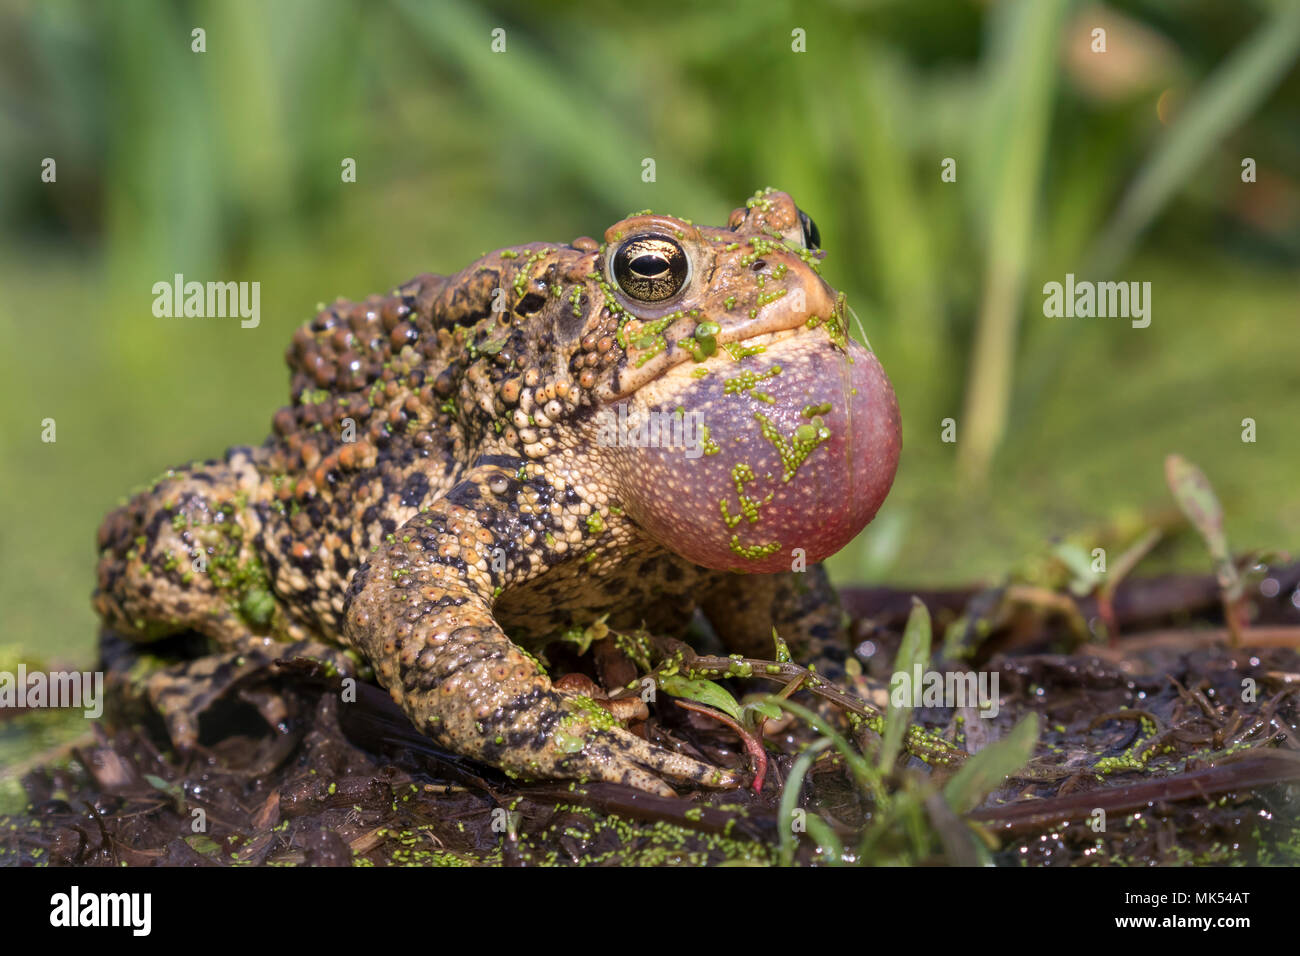 Male American toad (Anaxyrus americanus) calling sac inflated, covered with duckweed, Iowa, USA. Stock Photo